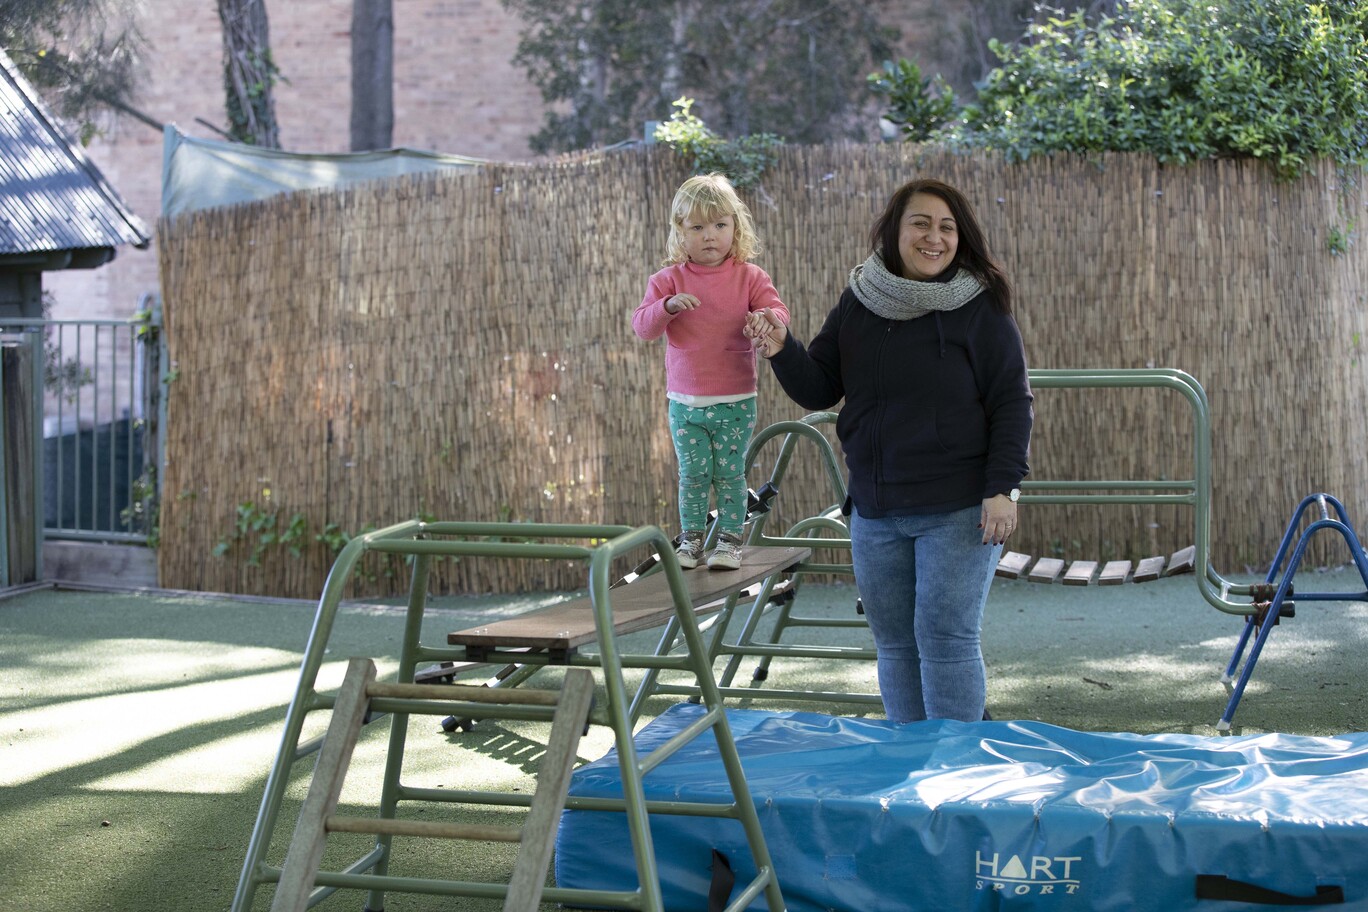 An adult holding the hand of a young child walking along a balance beam